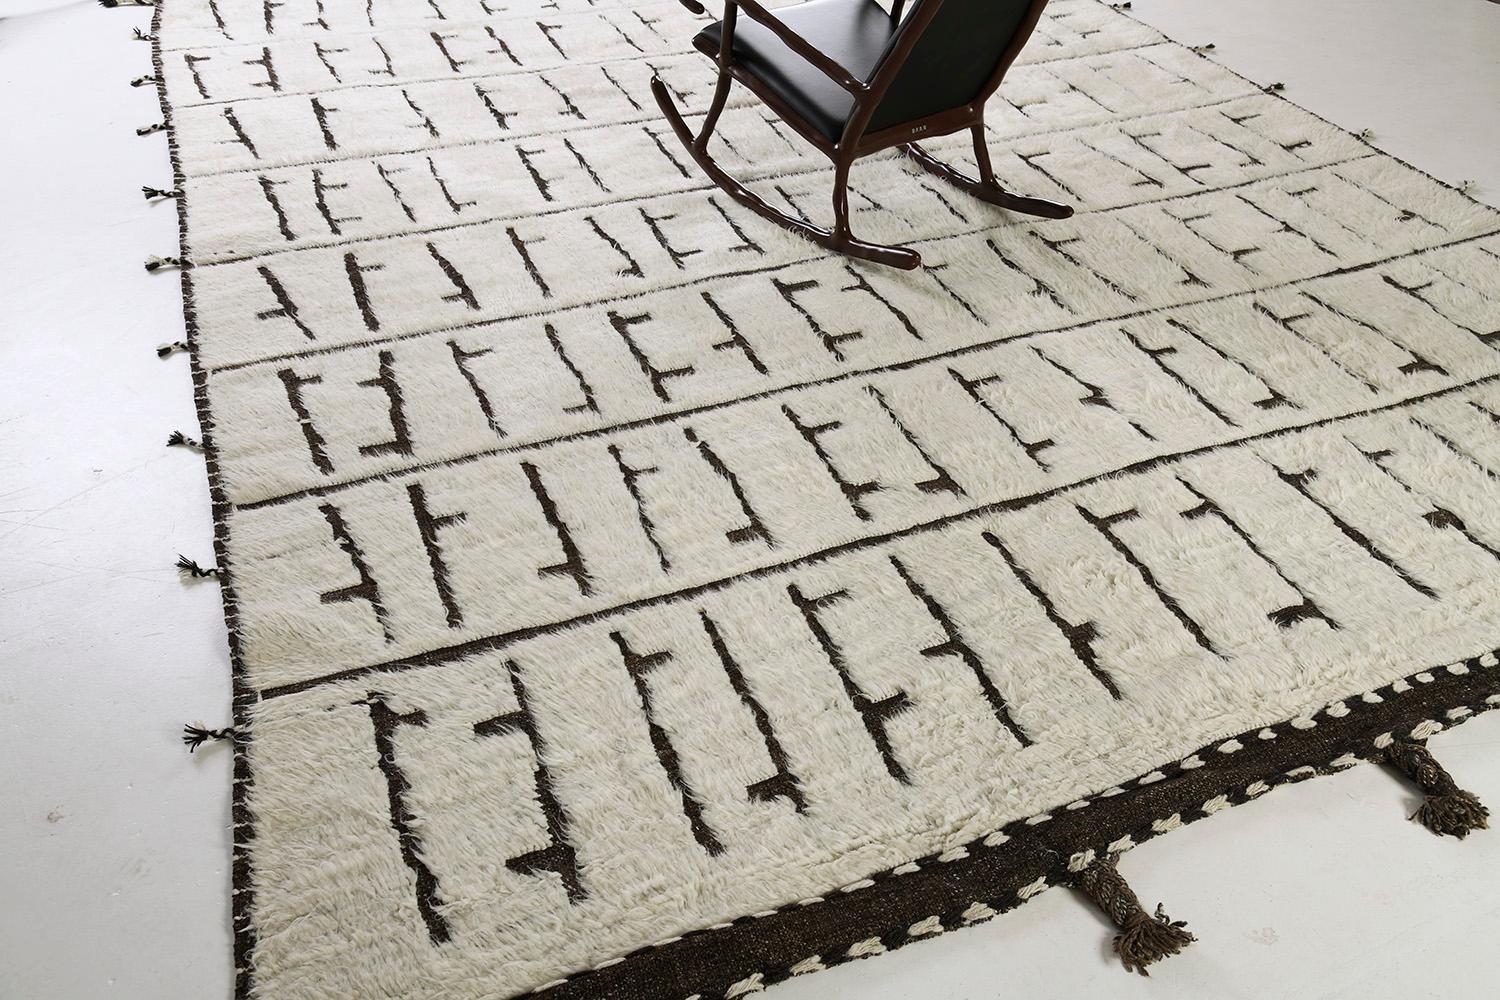 The Segge rug is a handwoven wool piece that features design elements that complements the modern design world. The repetitive brown symbolic elements create balance and harmony, handwoven with a natural brown pile weave in an ivory field. This